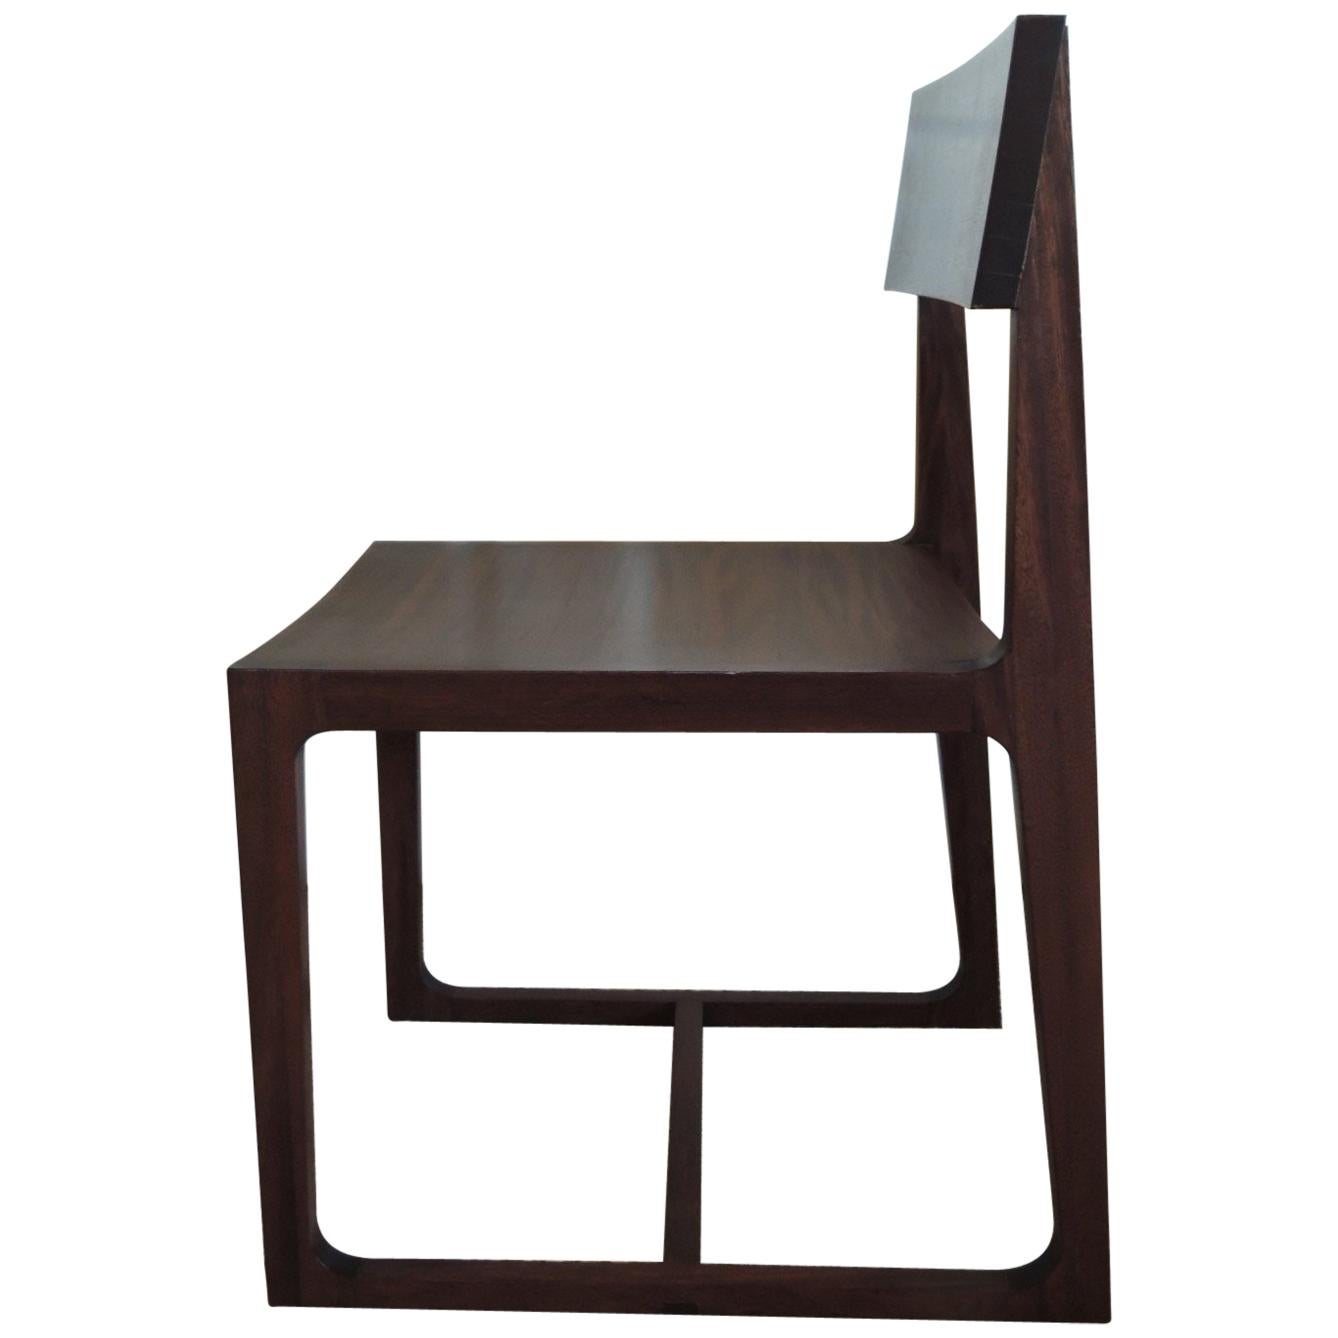 Contemporary Brazilian Hardwood Desk Side Chair Handcrafted in Brazil